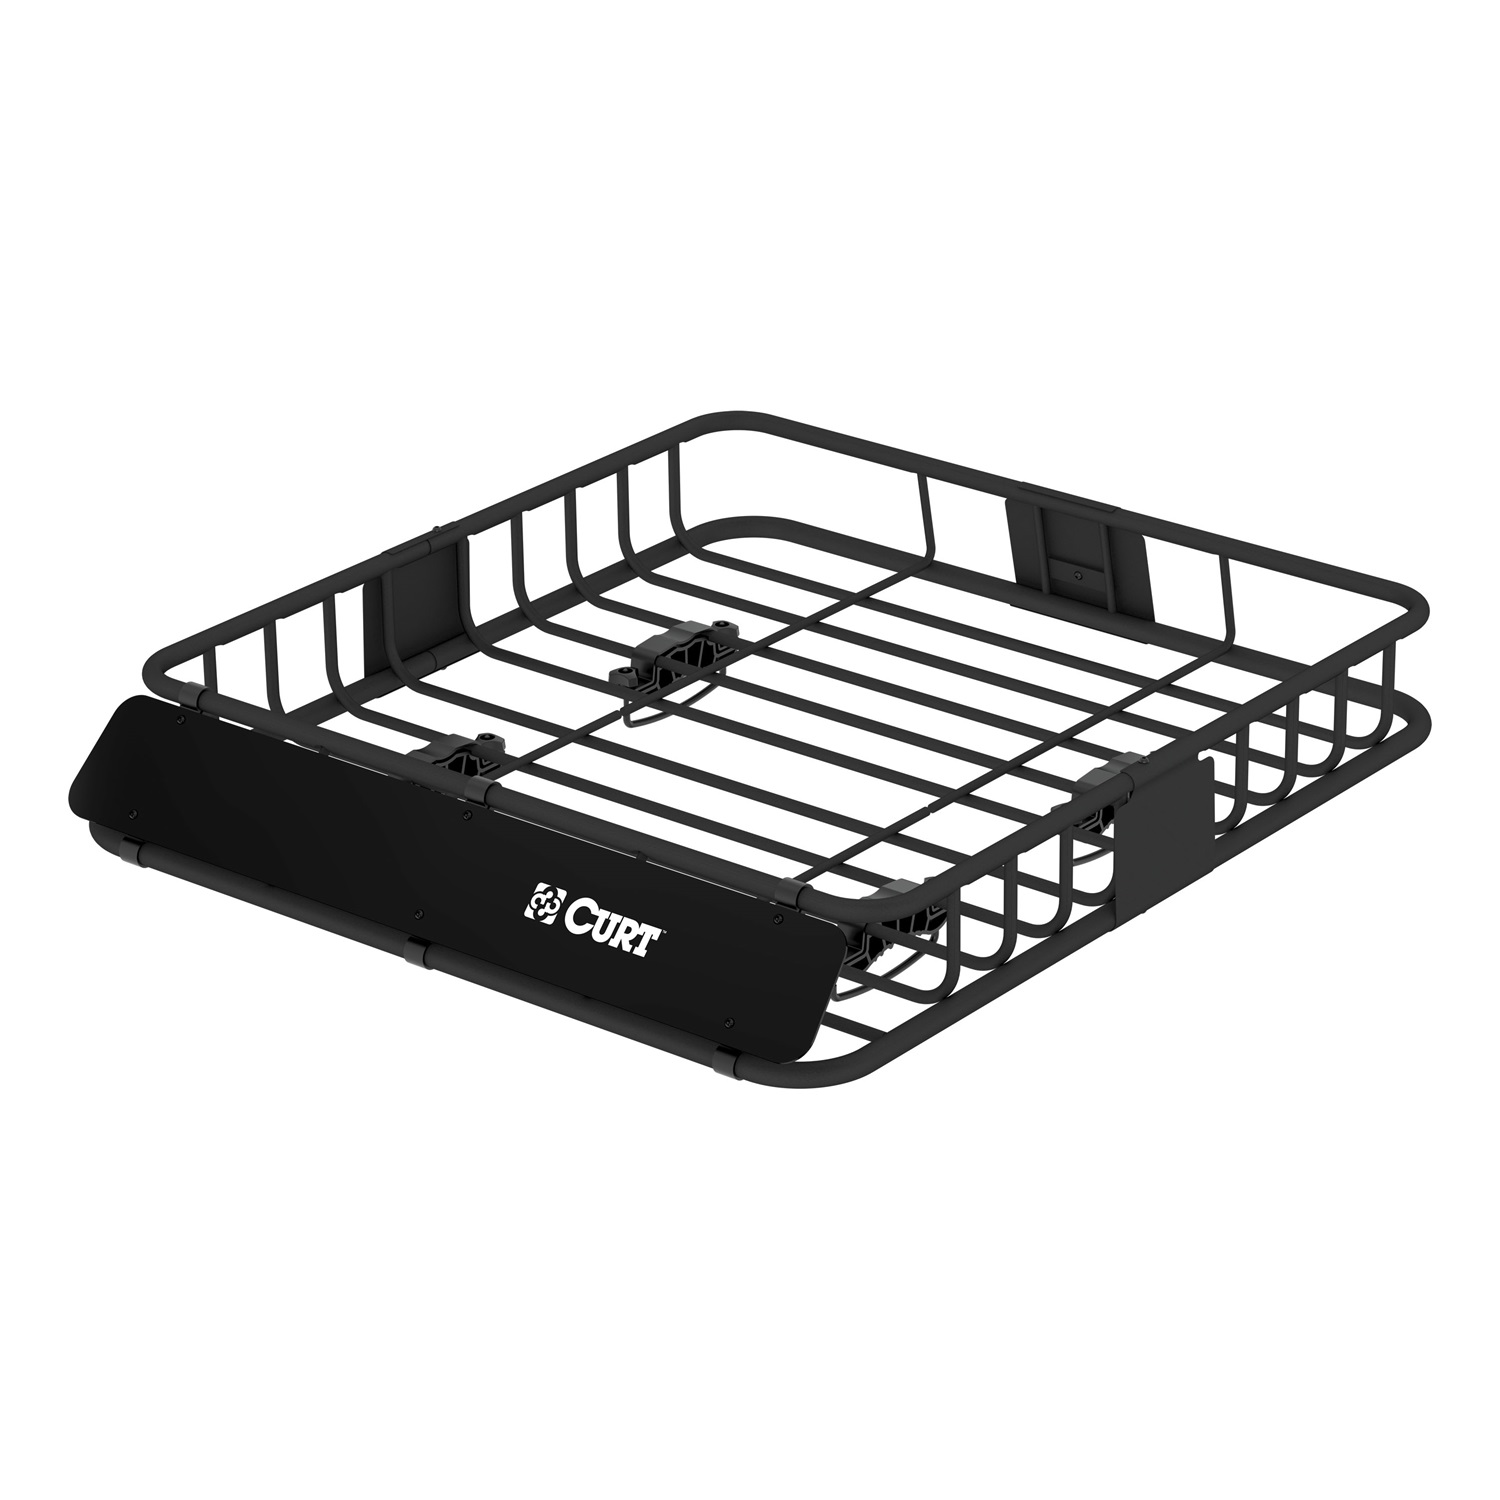 CURT Manufacturing CURT Manufacturing 18115 Roof Mounted Cargo Rack  Fits